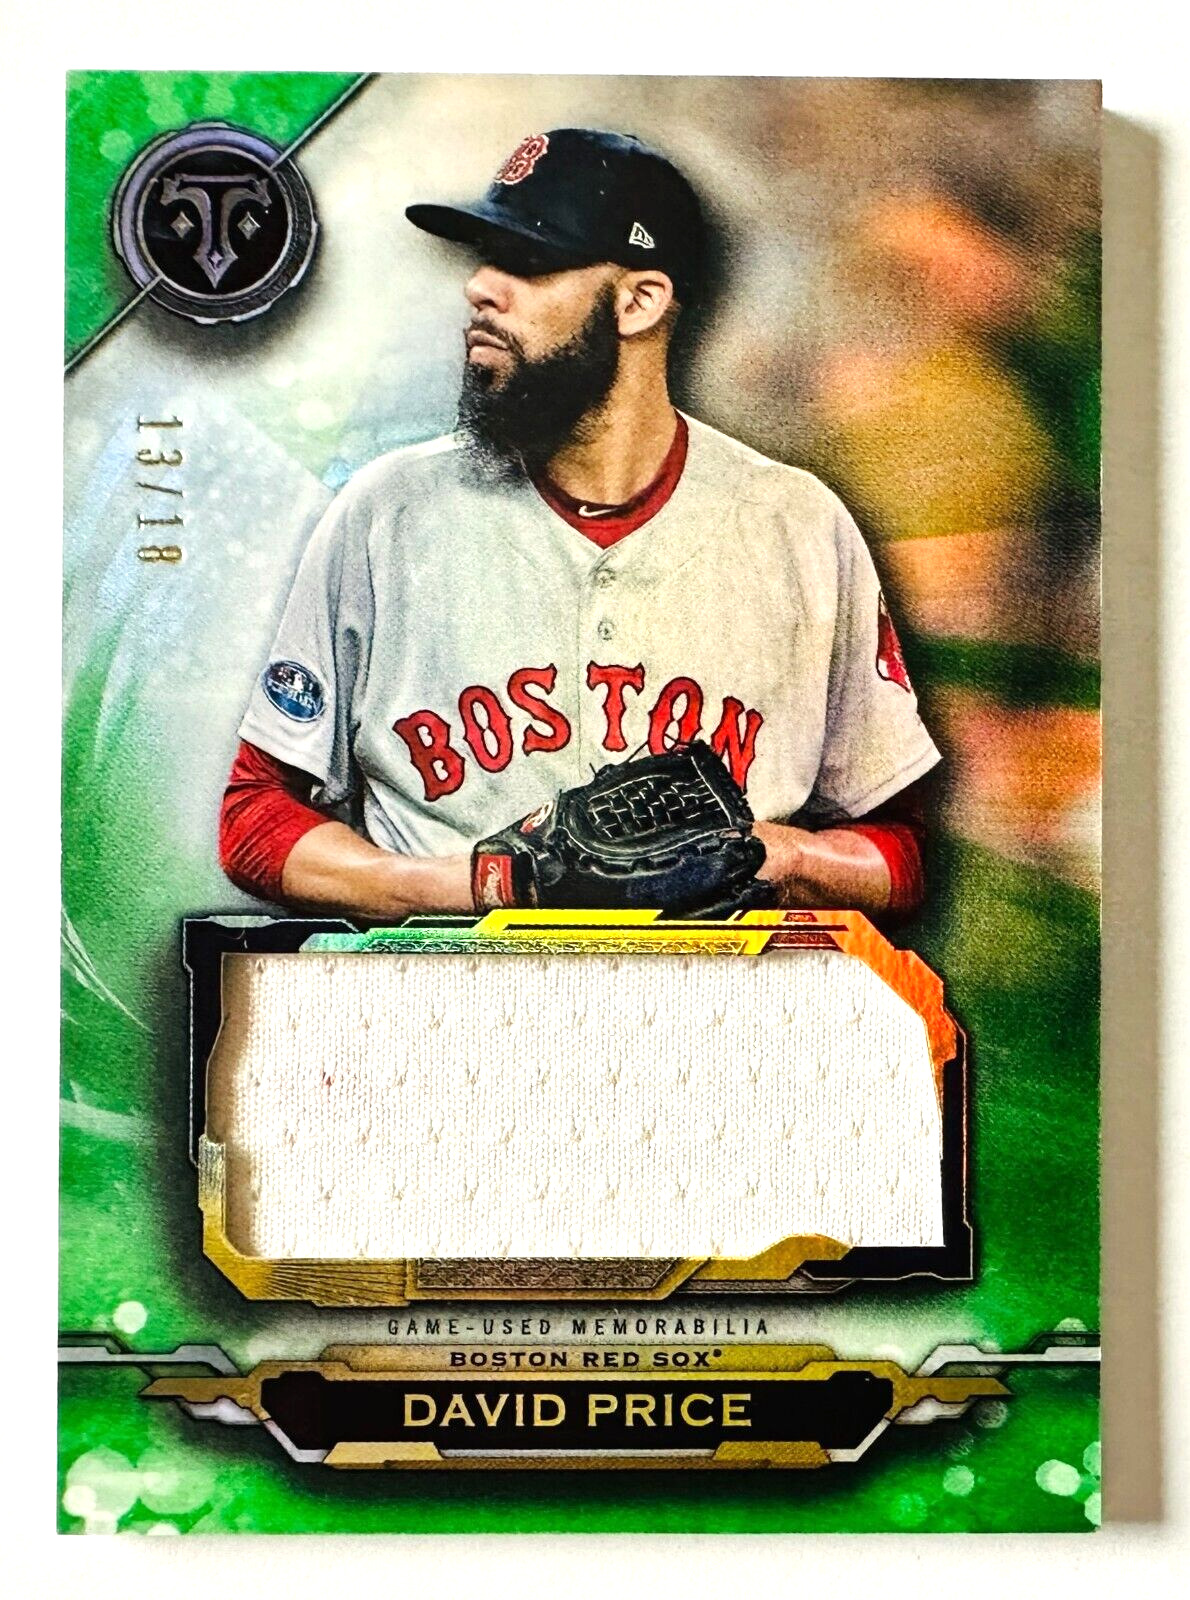 2019 Topps Triple Threads David Price Jersey Card GREEN SP #/18 Red Sox